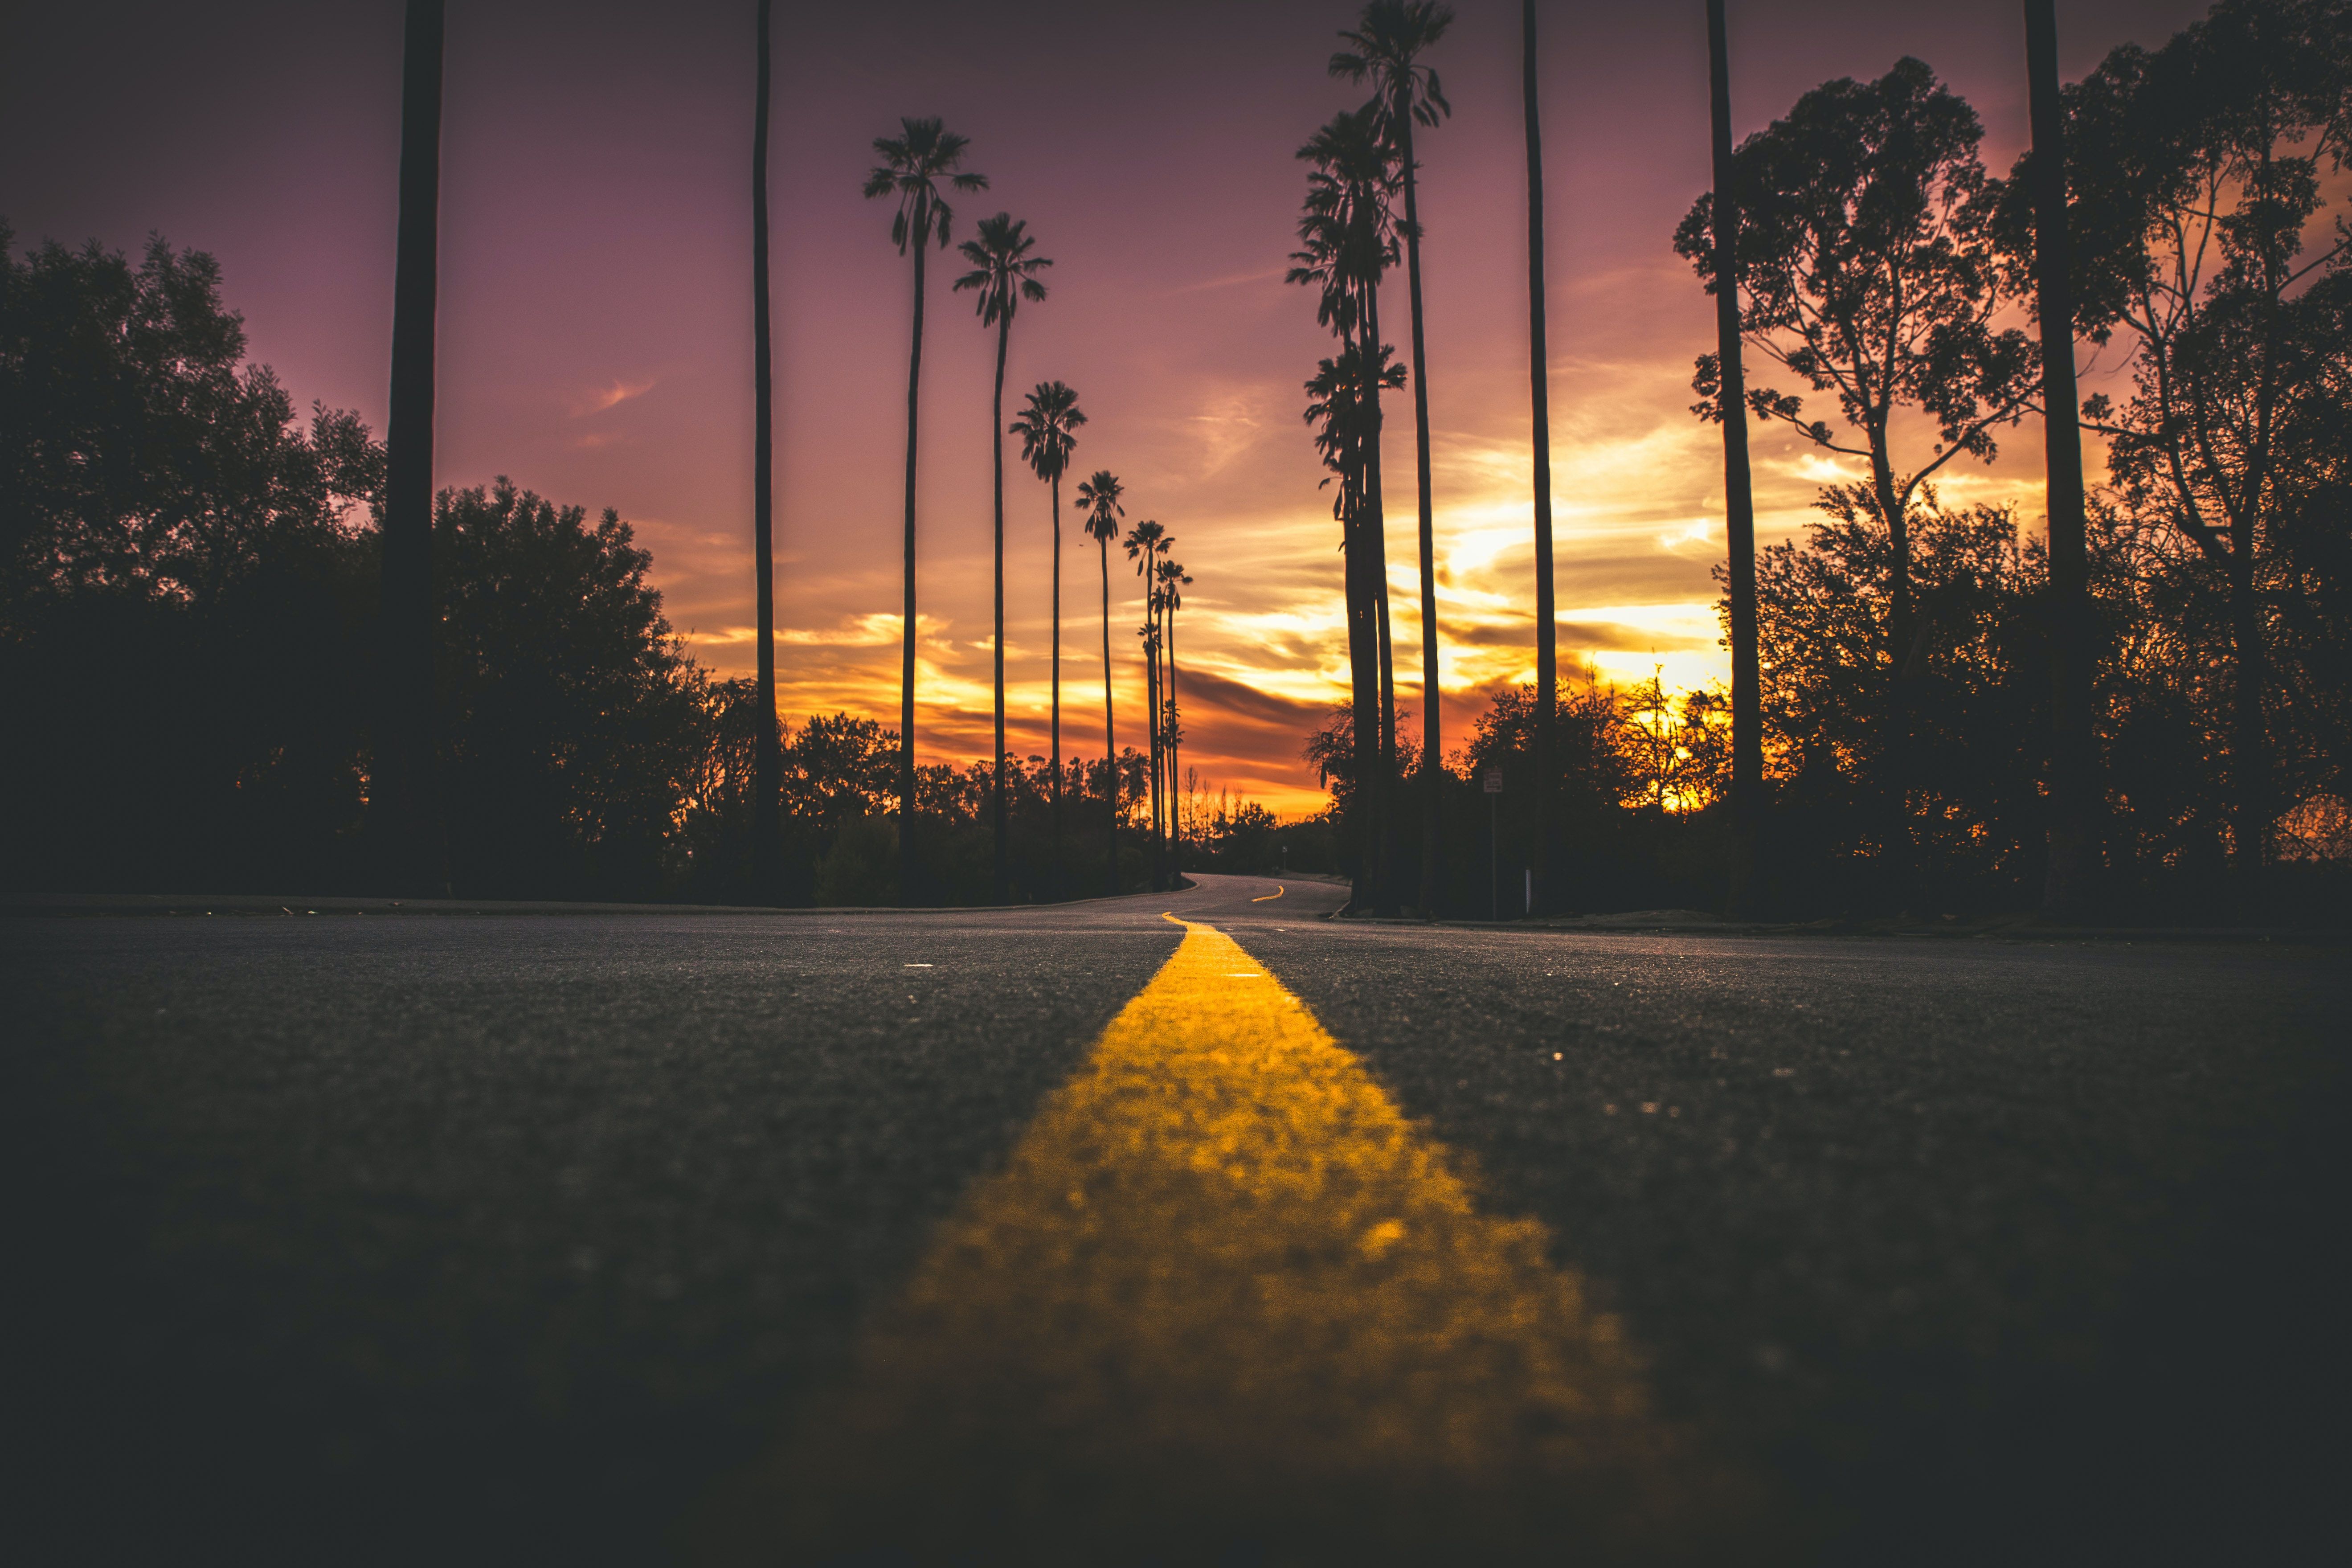 A yellow line on the road with palm trees in the background during sunset. - Sunset, California